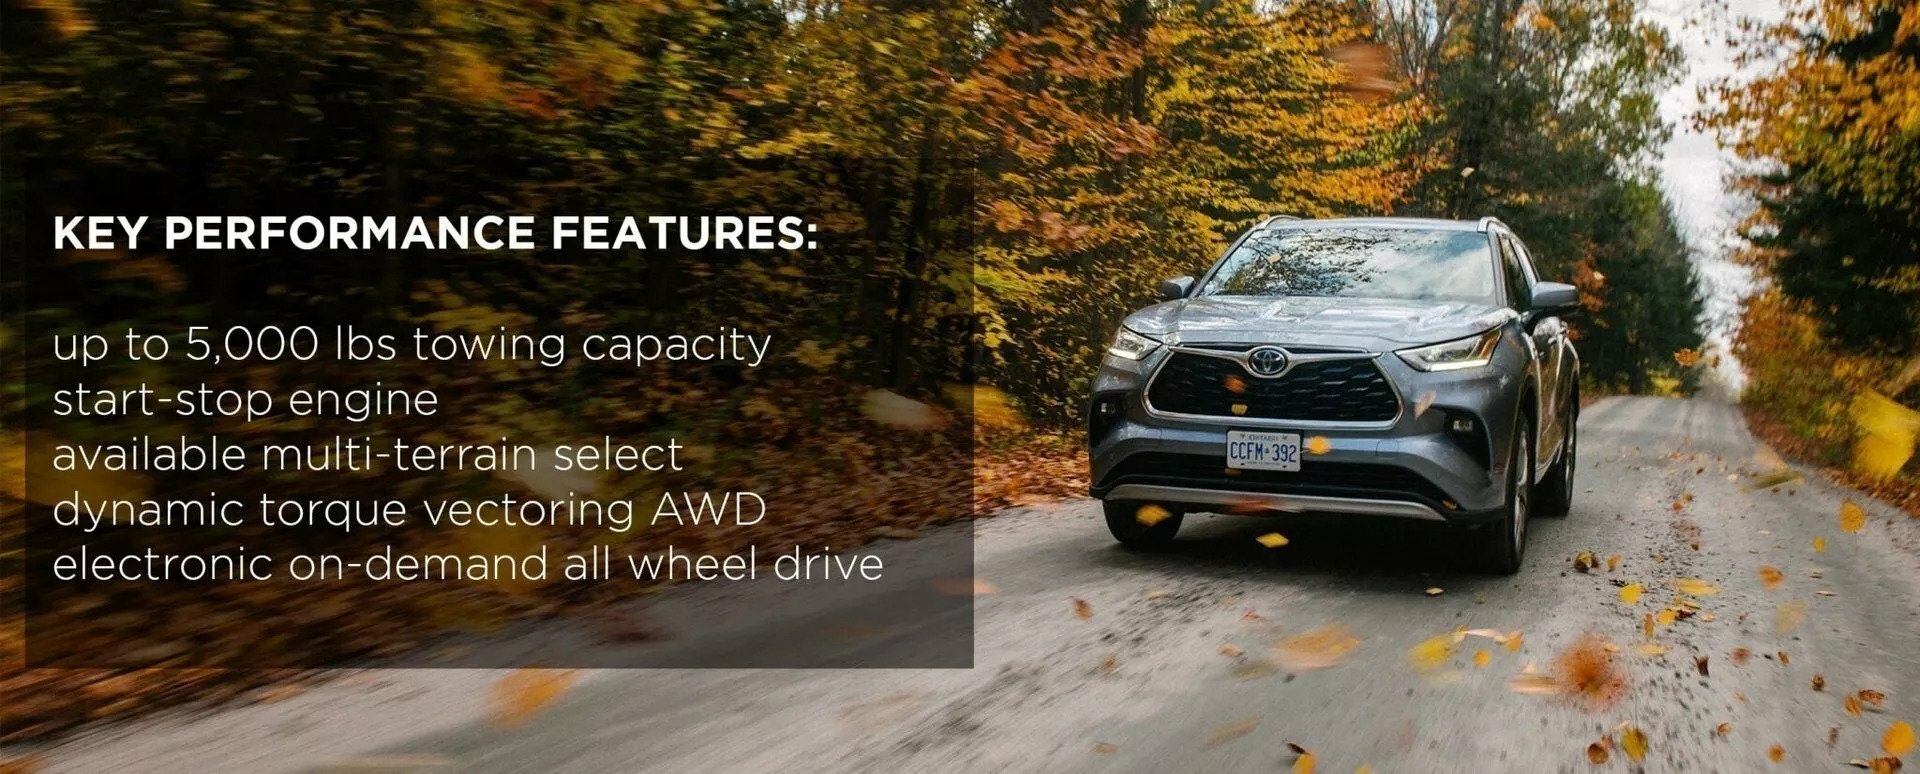 Key Performance Feature of Toyota Highlander: 1) up to 5,000 lbs. towing capacity 2) multi-terrain select 3) dynamic torque vectoring AWD 3) electric on-demand all wheel drive